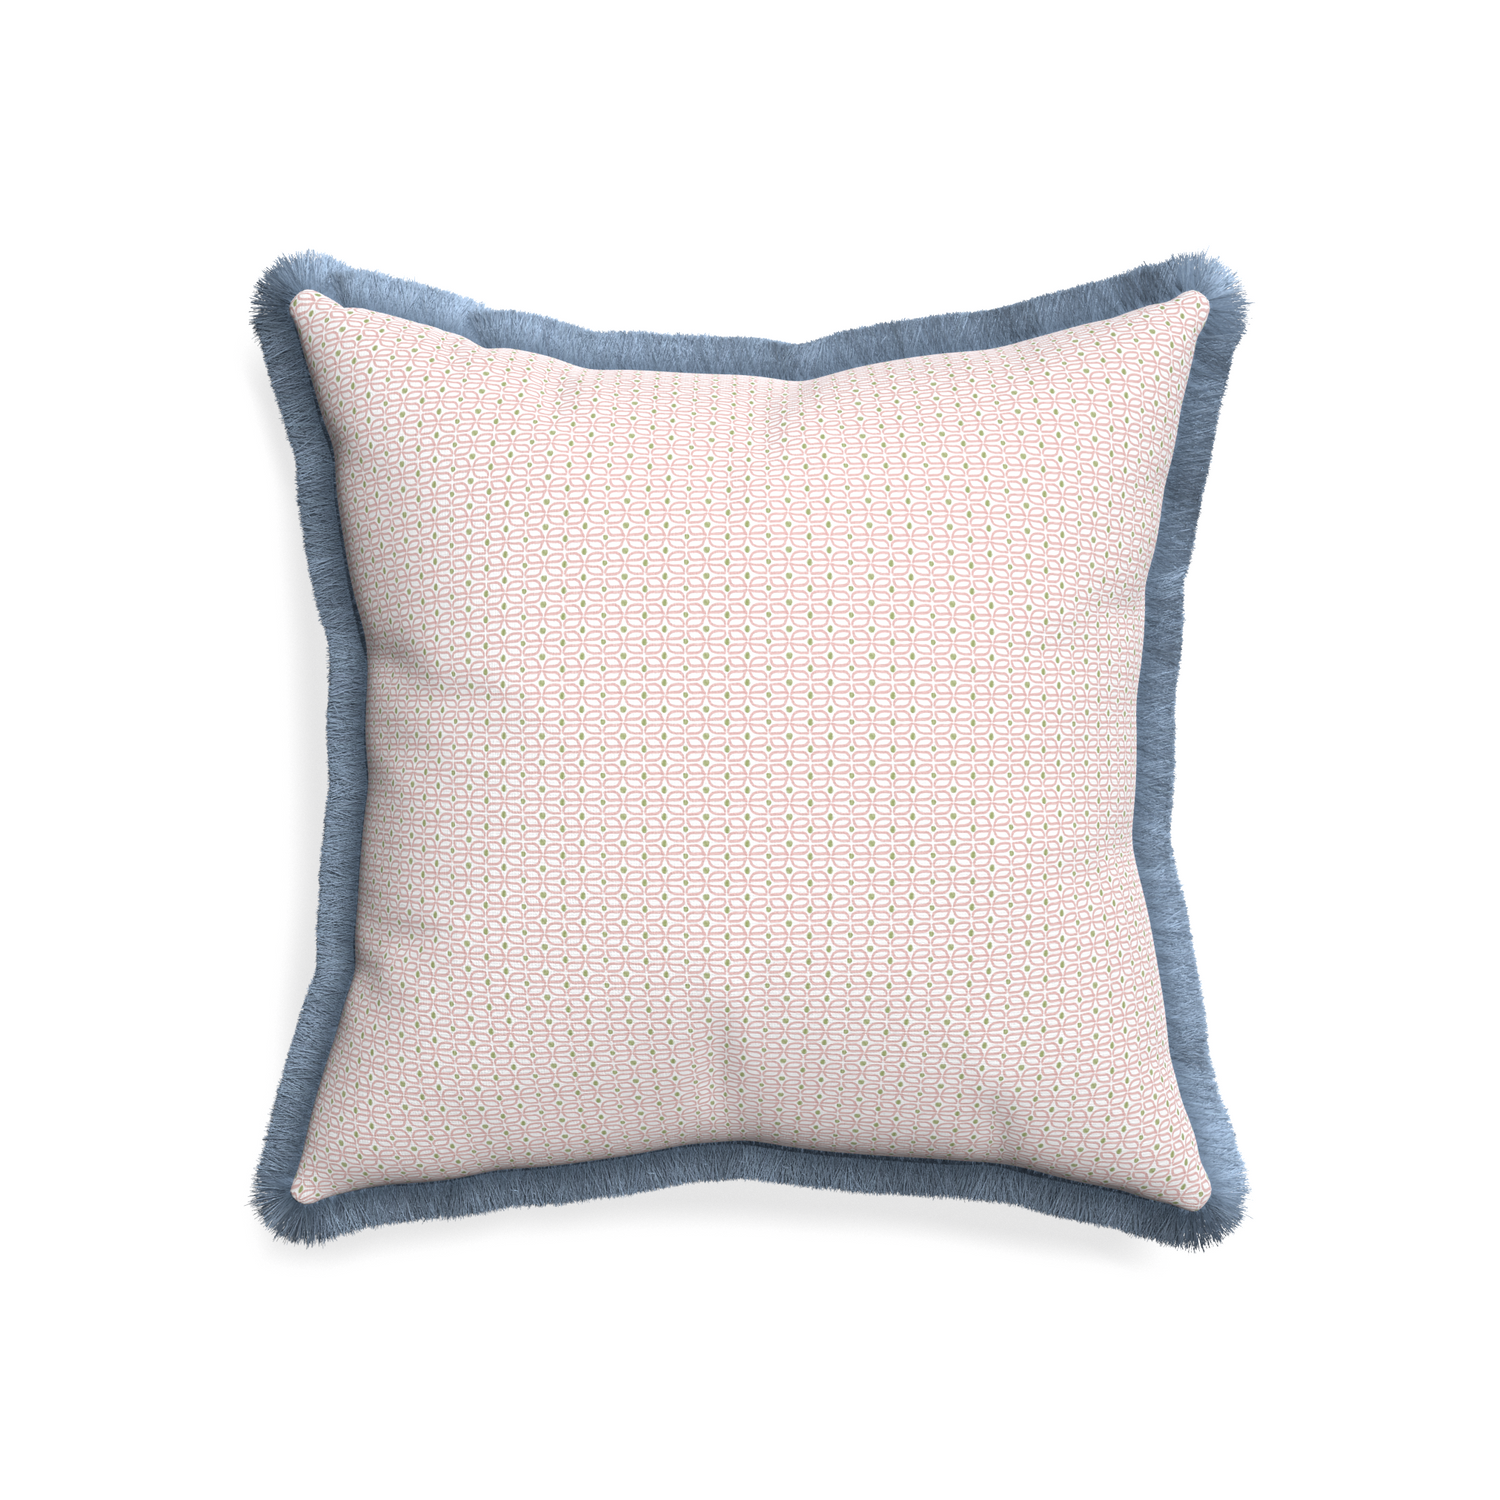 20-square loomi pink custom pink geometricpillow with sky fringe on white background